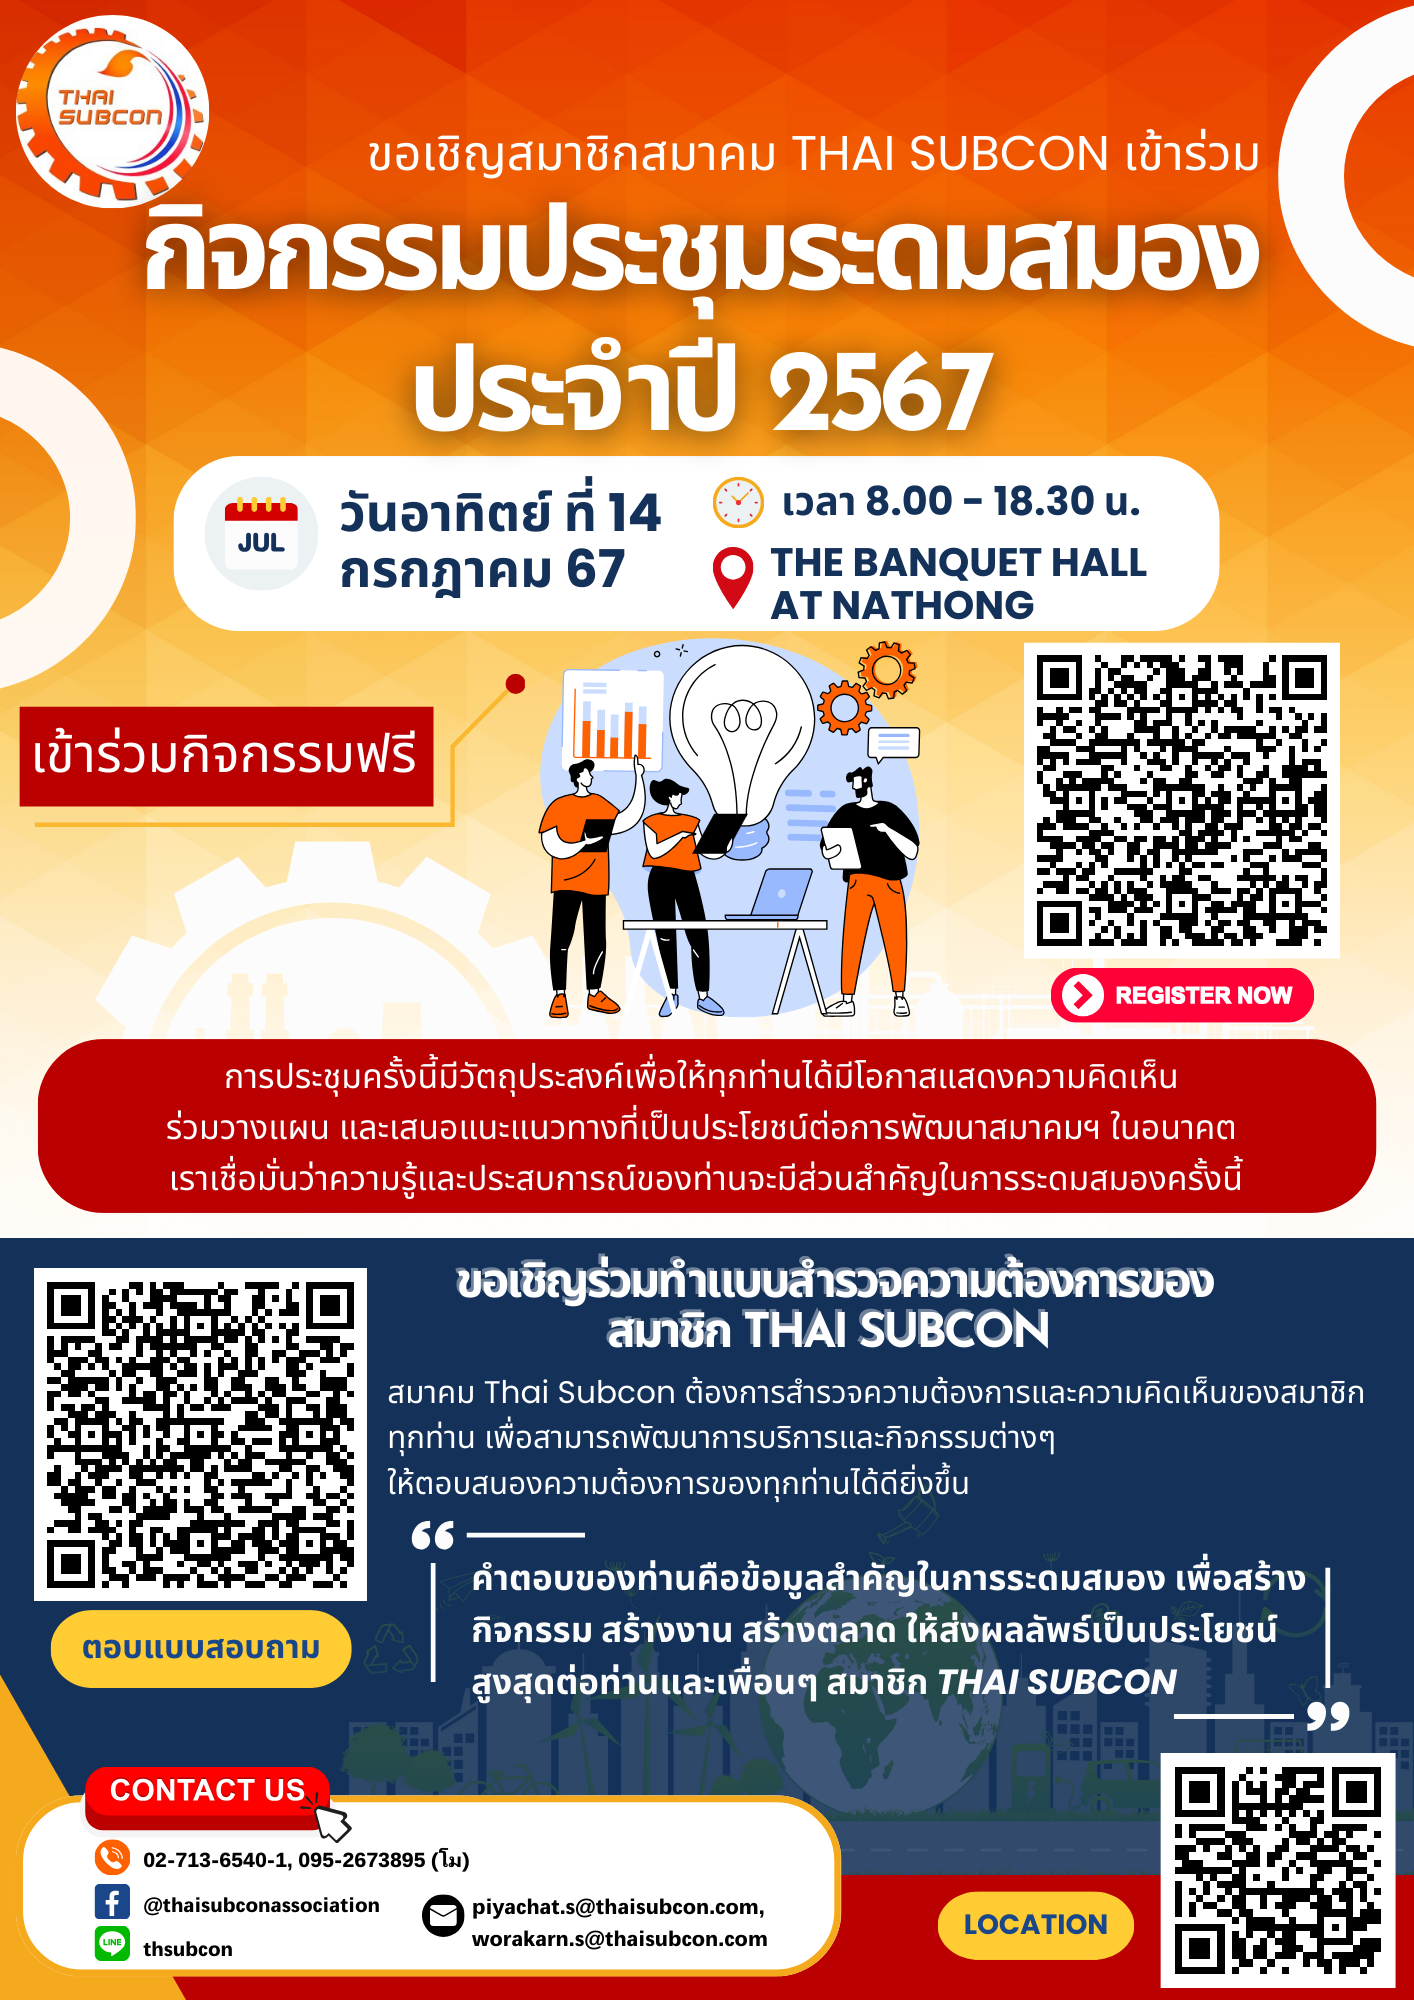 Invite all members of the Thai Subcon Association to participate in brainstorming activities.